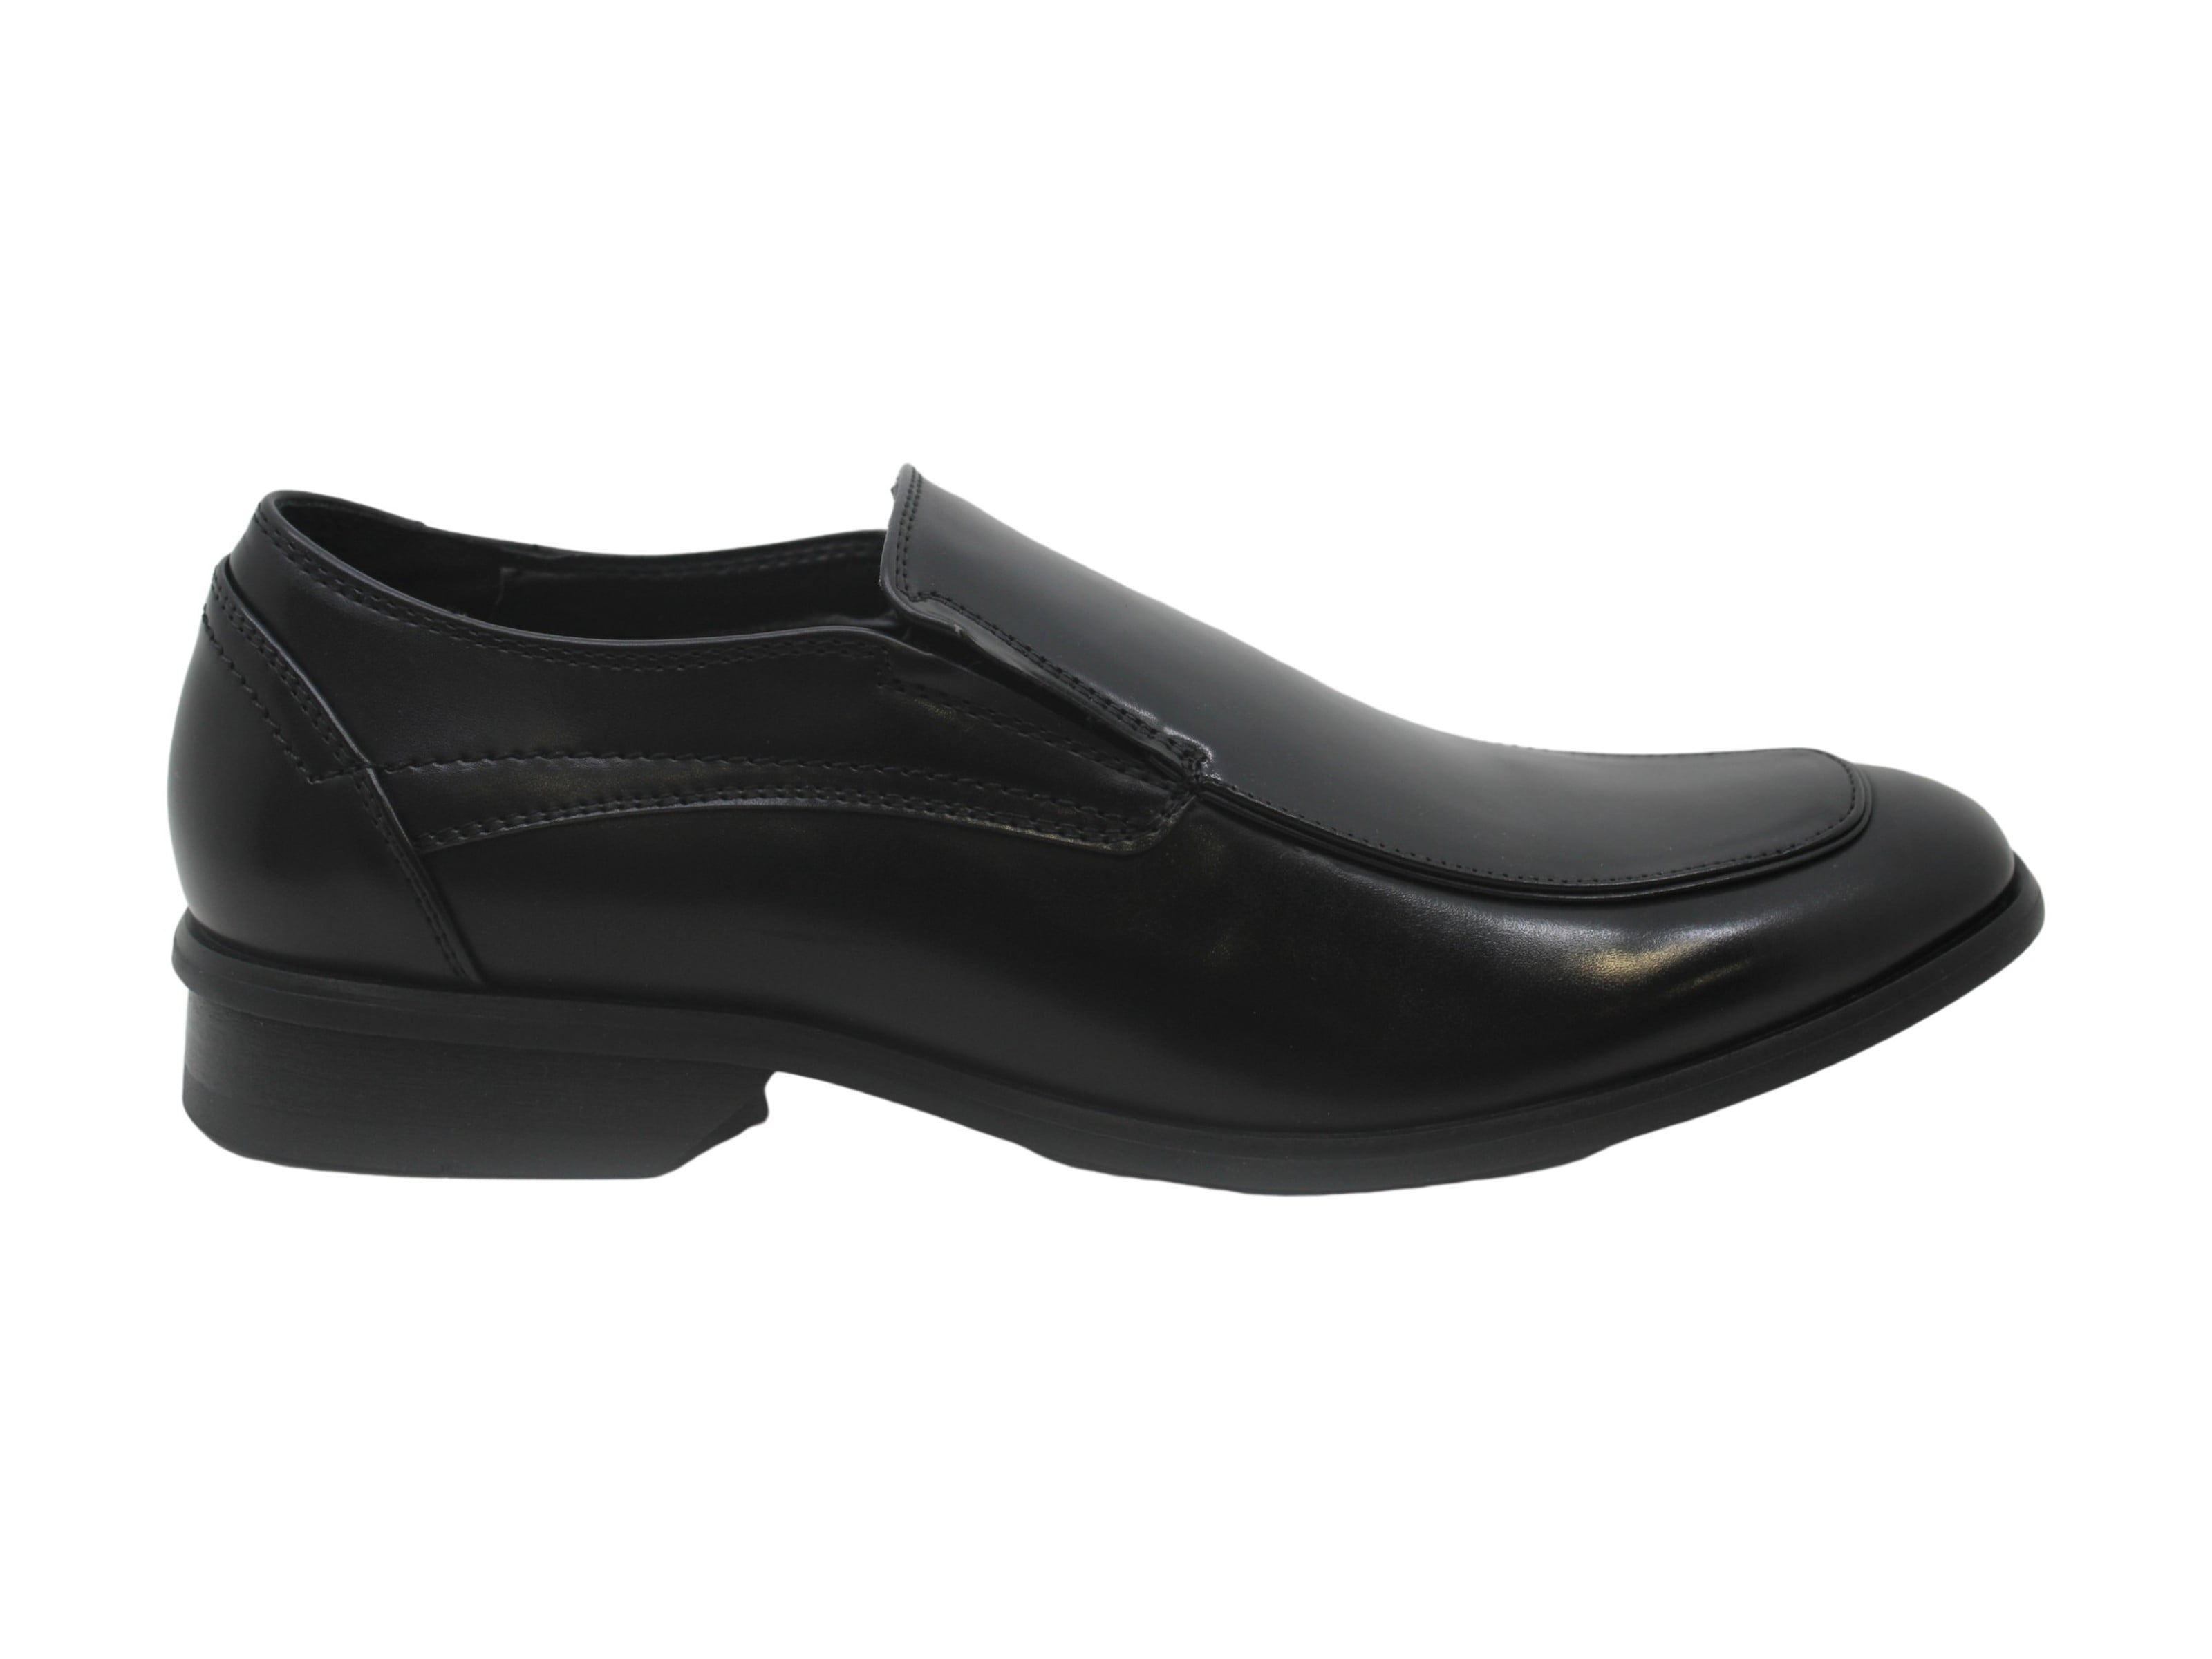 Kenneth Cole Reaction - Kenneth Cole Reaction Men's Shoes dawn Closed ...